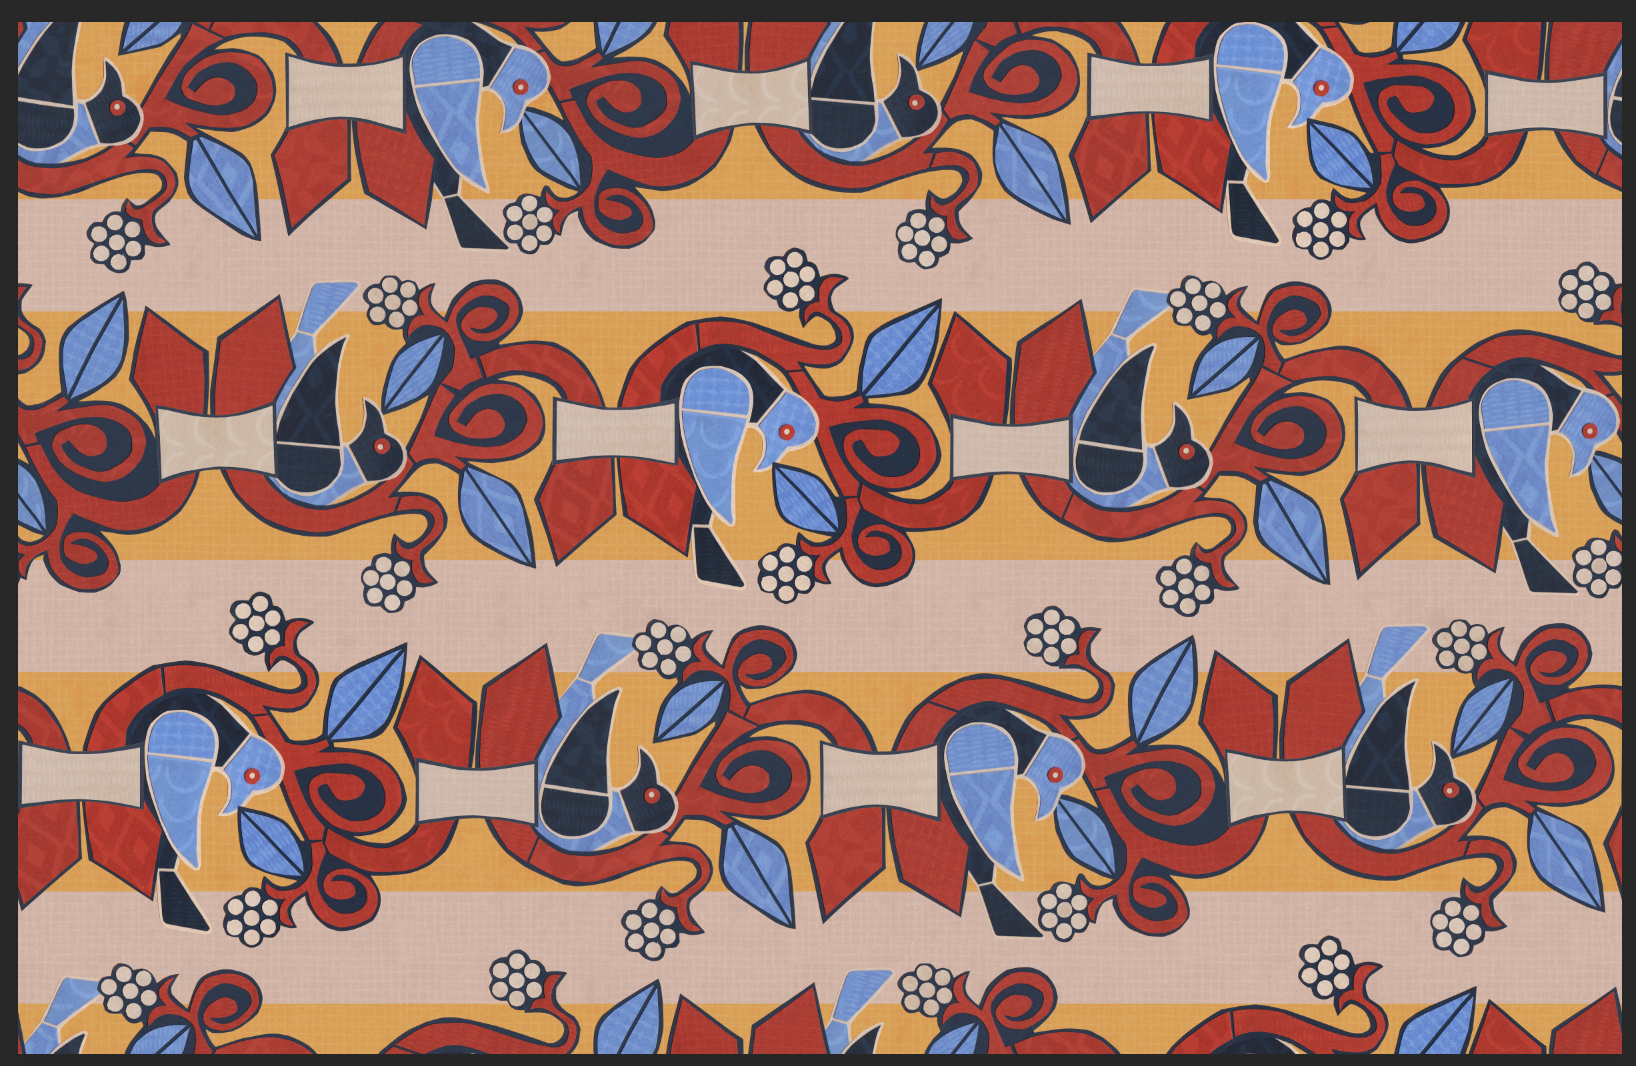 image of a repeating pattern of birds